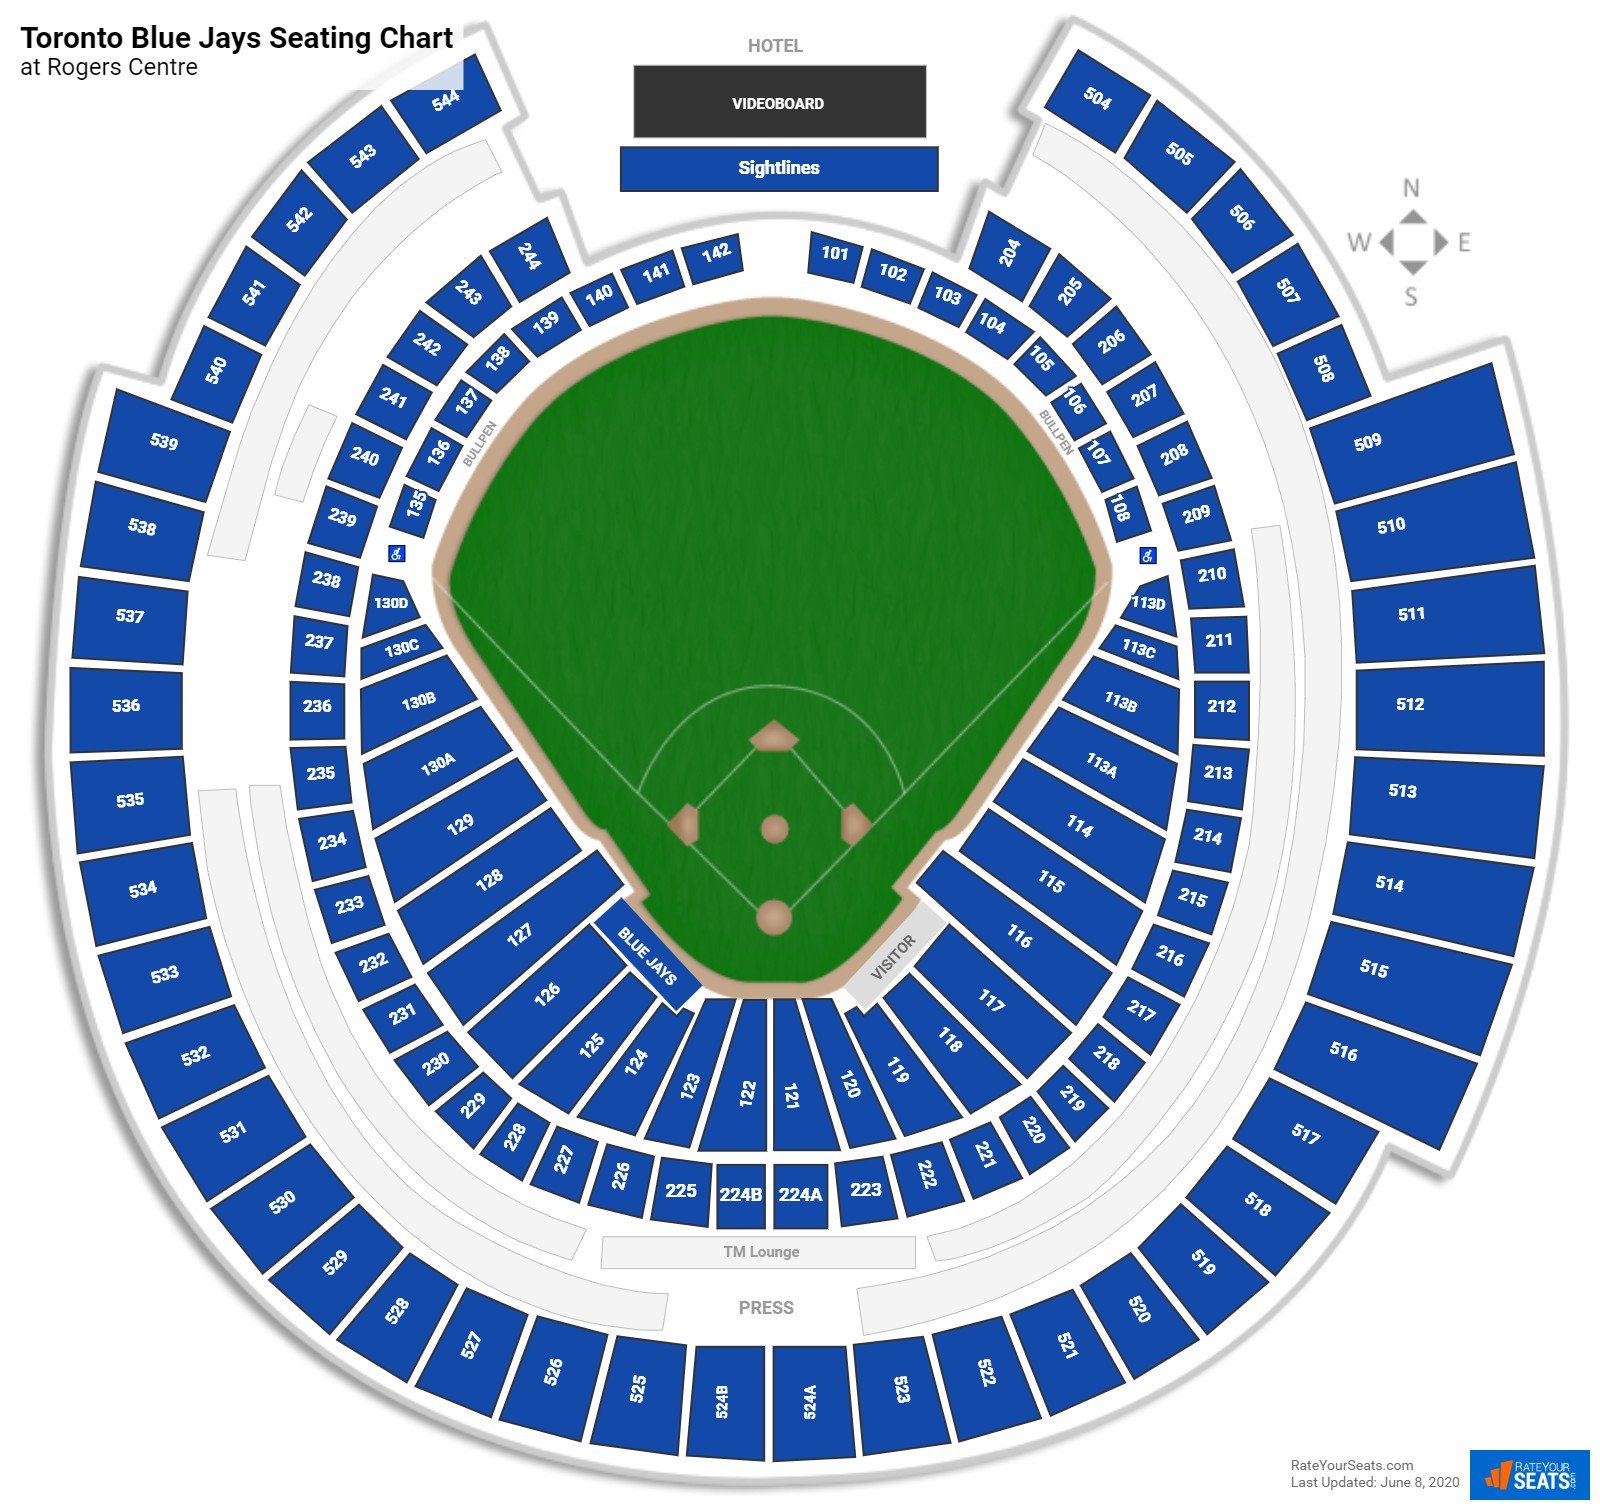 Toronto Blue Jays Seating Chart At Rogers Centre 